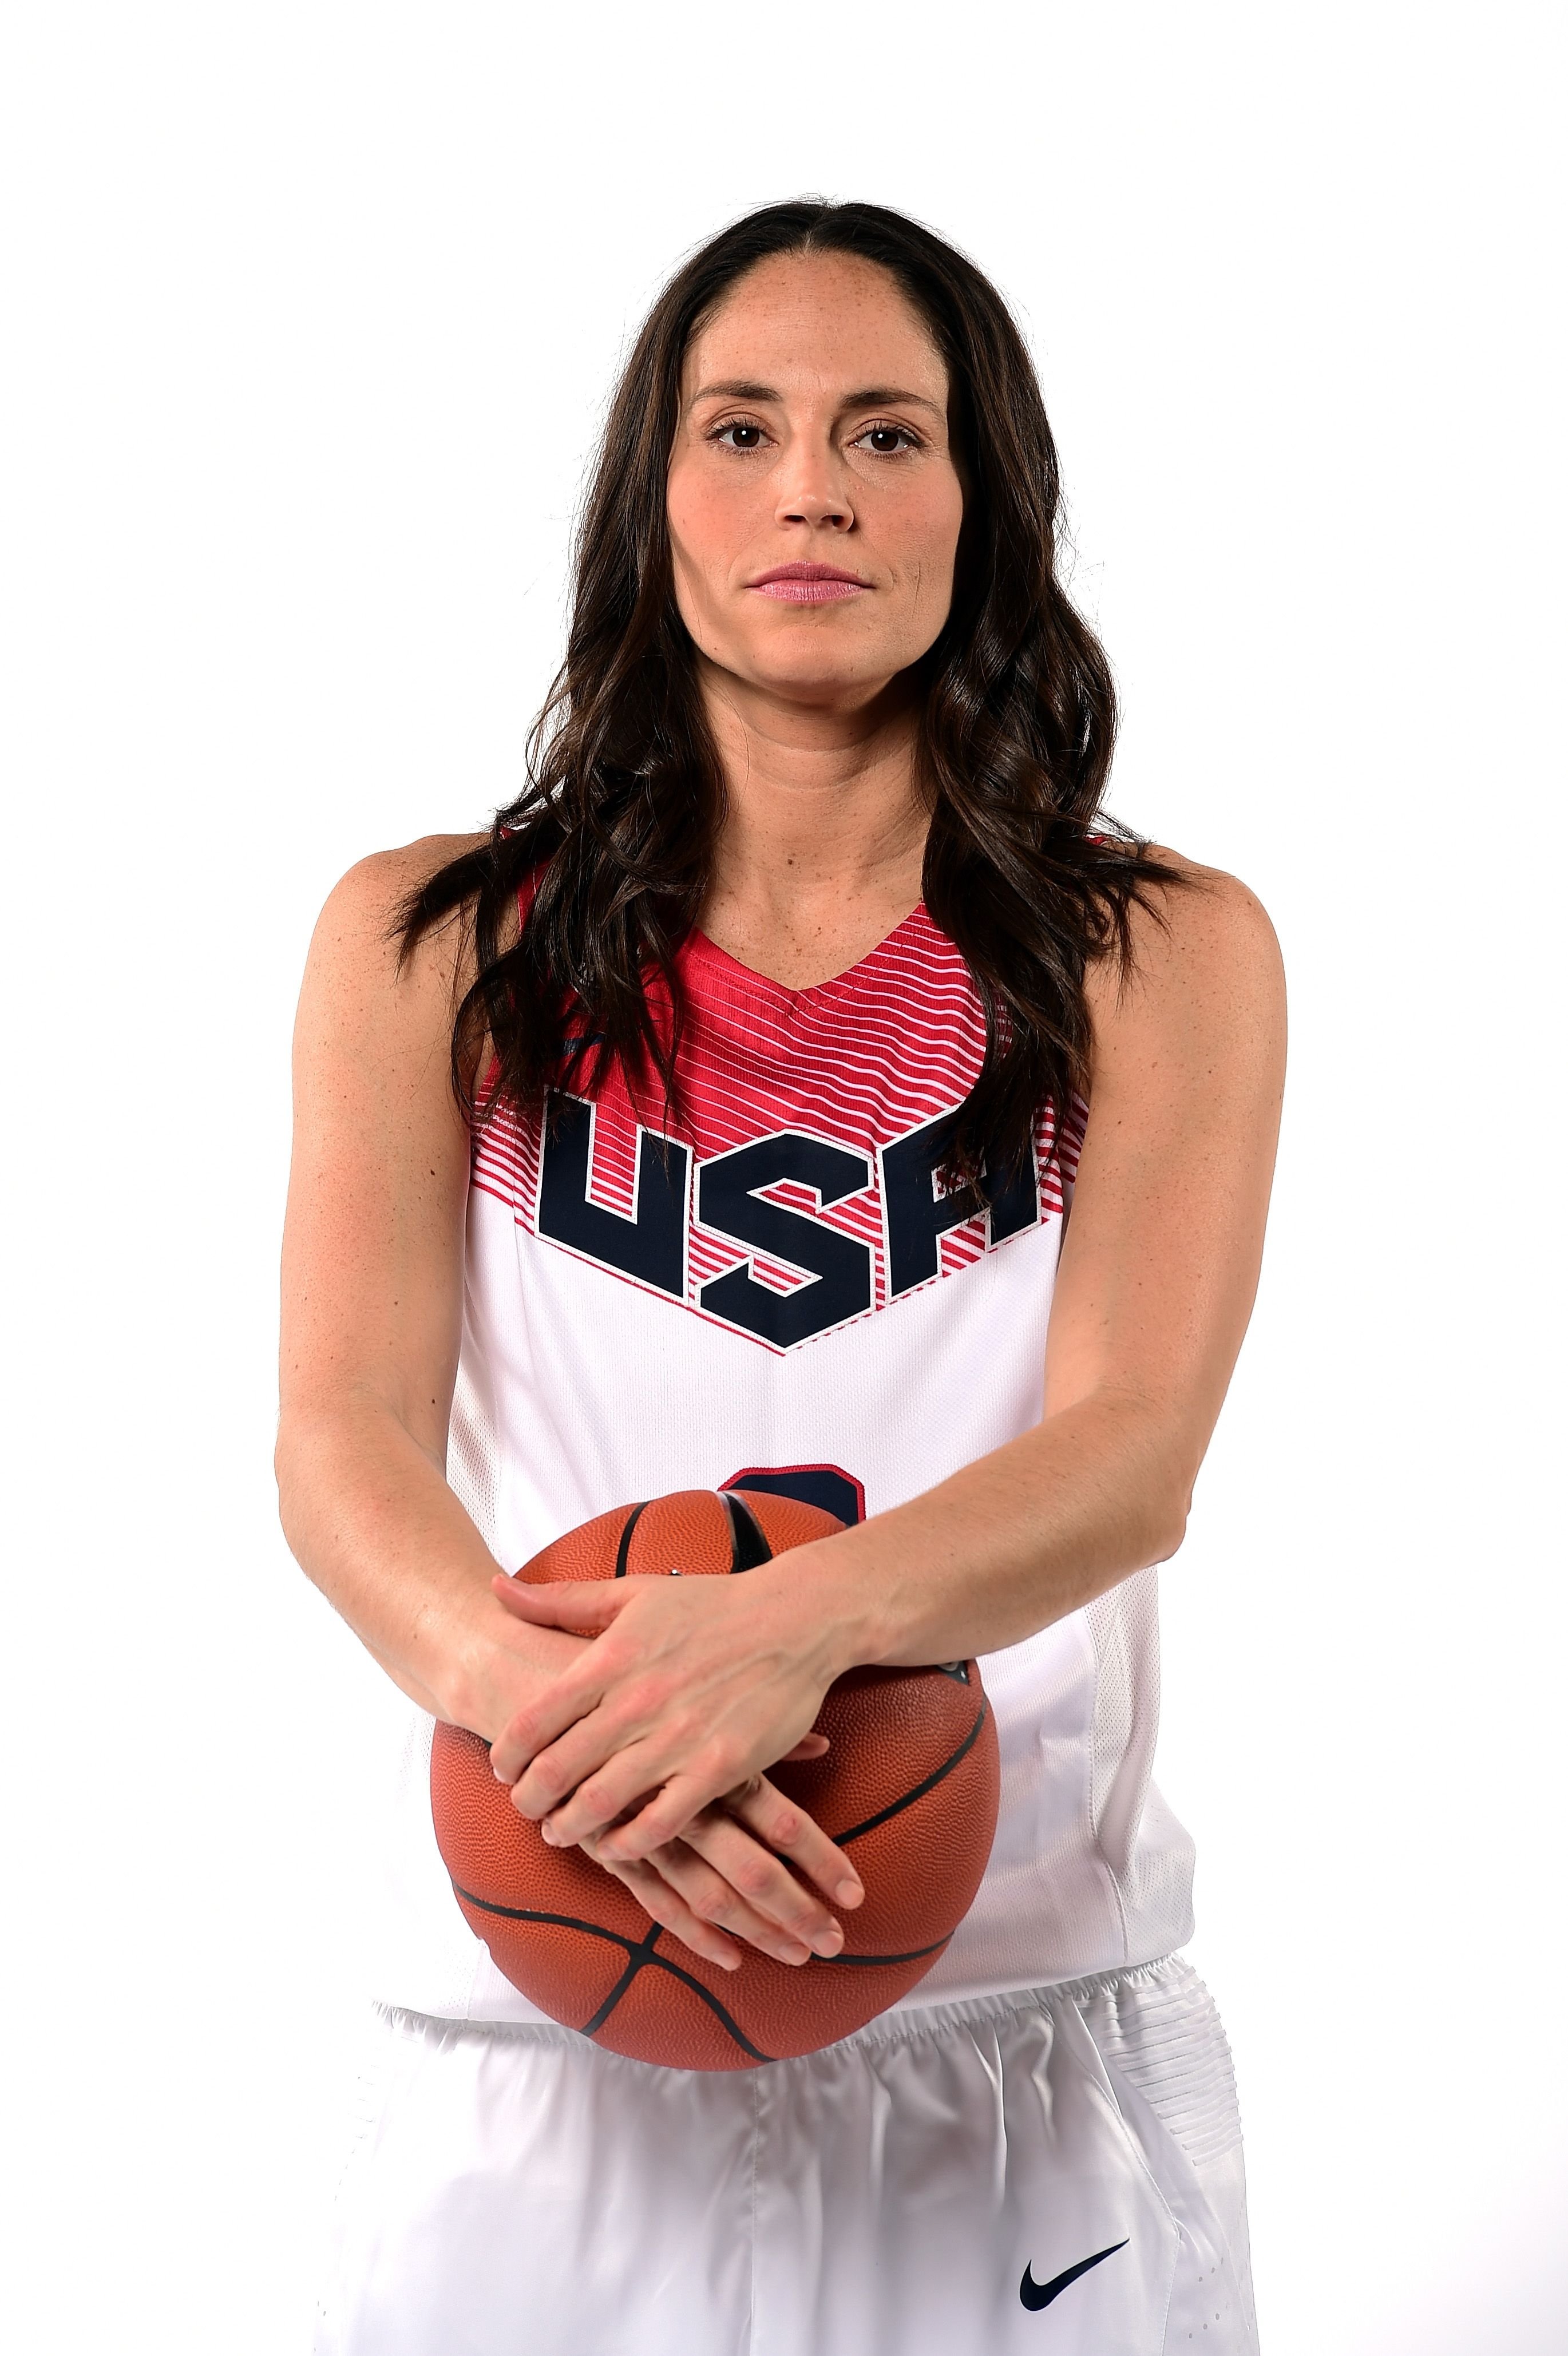 Sue Bird poses for a portrait at the USOC Rio Olympics Shoot on November 20, 2015, in Los Angeles, California | Photo: Harry How/Getty Images